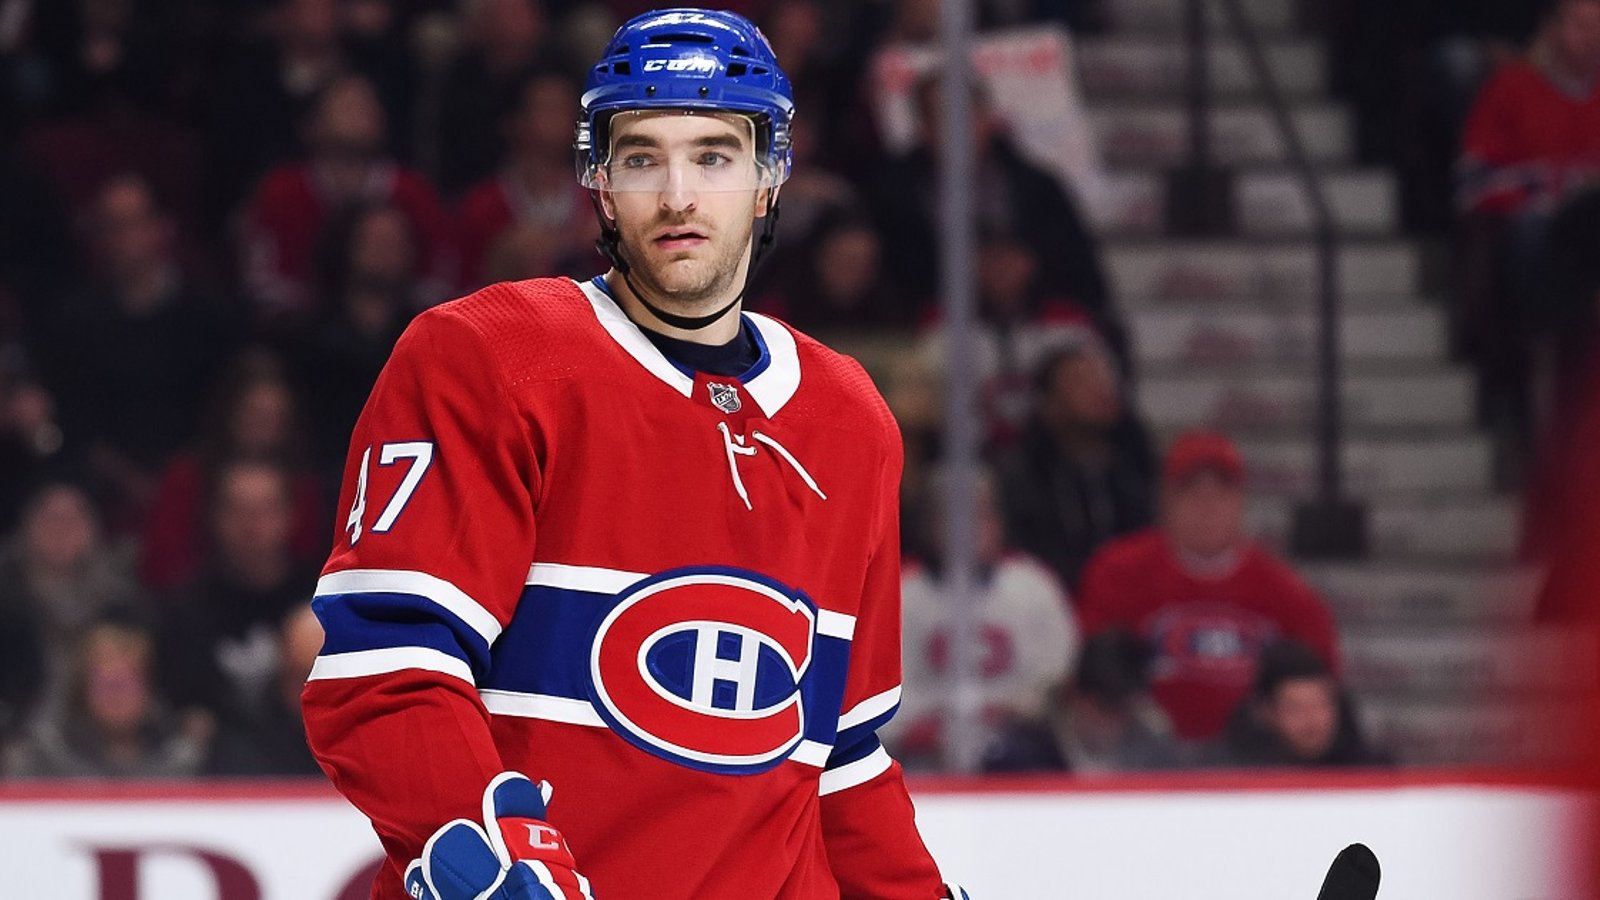 Breaking: Canadiens have lost Agostino on waivers.